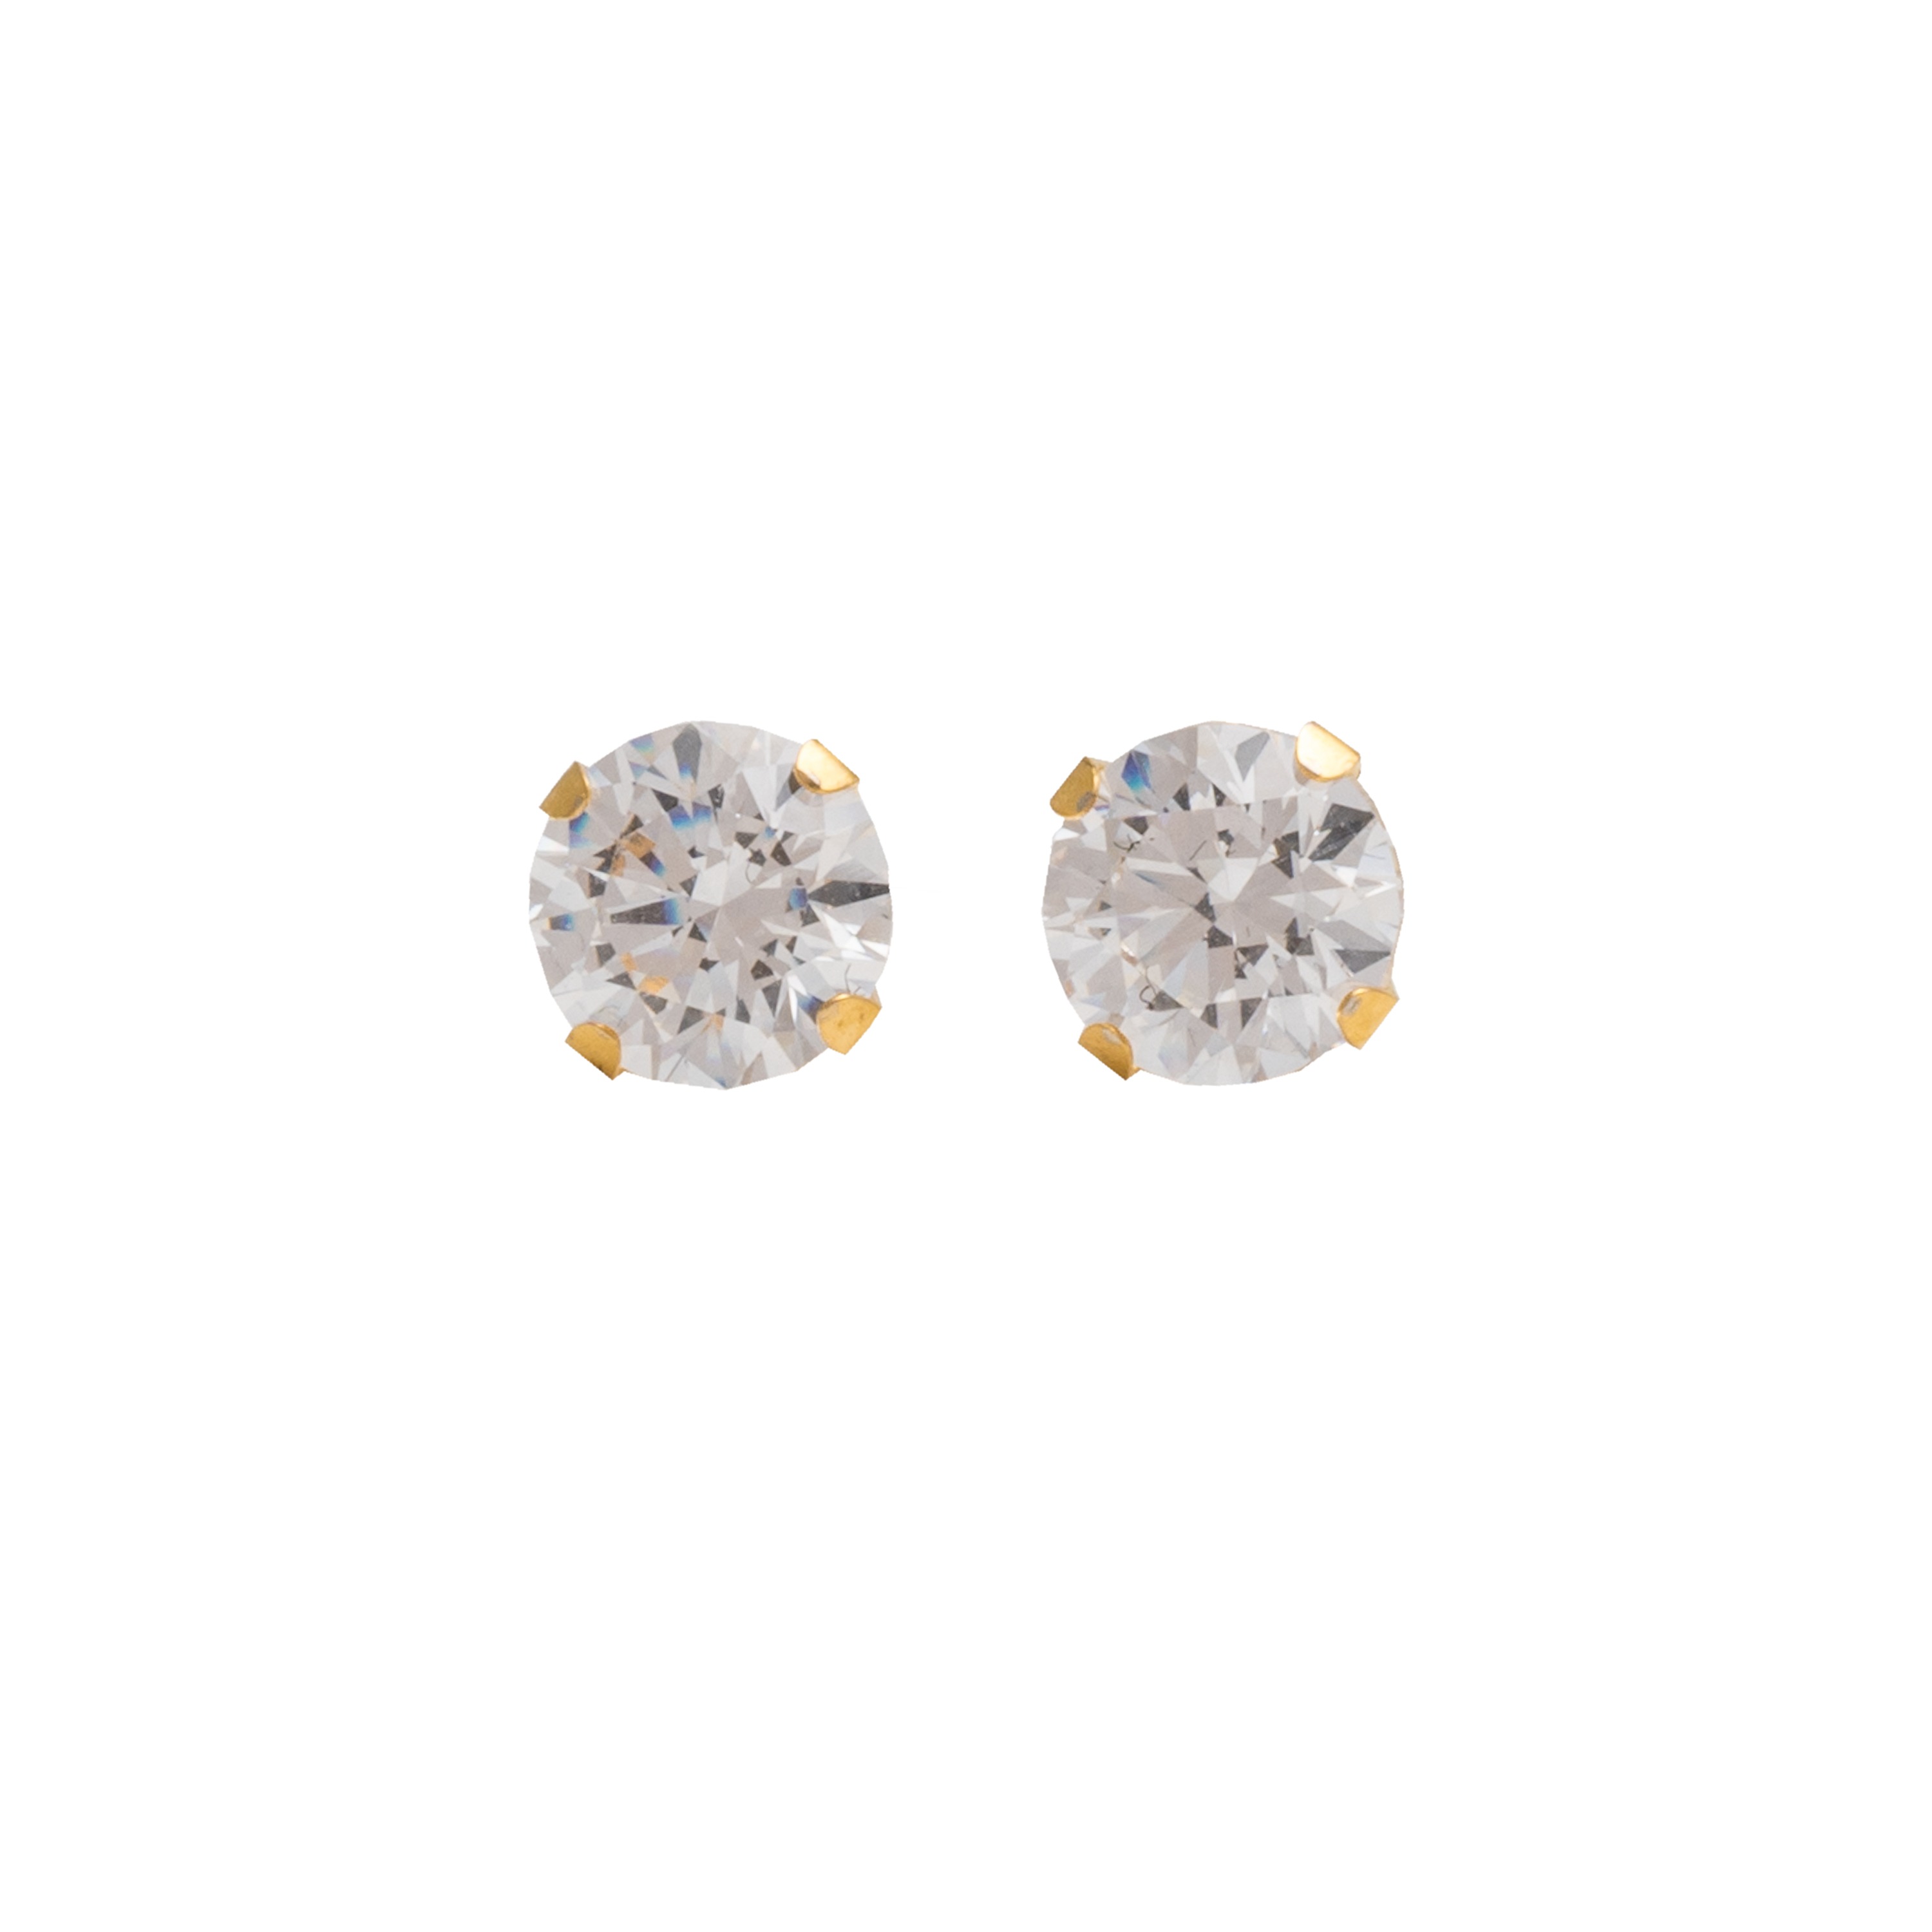 5MM - Cubic Zirconia (Round) - Crystal Clear | 24K Gold Plated Simple Yet Stylish, Cute & Trending Fashion Earrings / Ear Studs for Girls & Women Online @ Pakistan | Studex Sensitive (for daily wear)